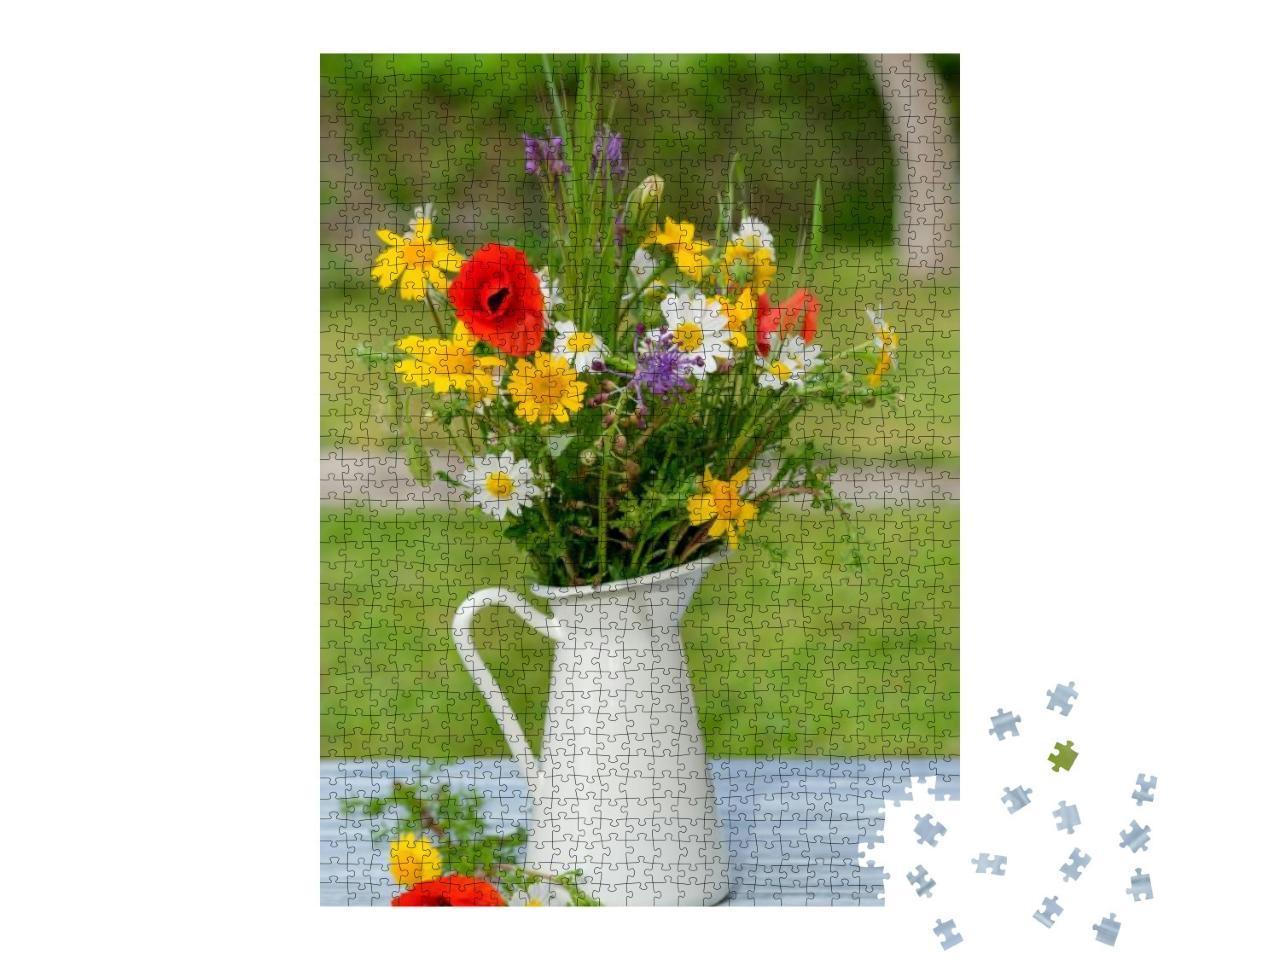 Wild Flower Bouquet in White Jug on Blue Vintage Wooden T... Jigsaw Puzzle with 1000 pieces